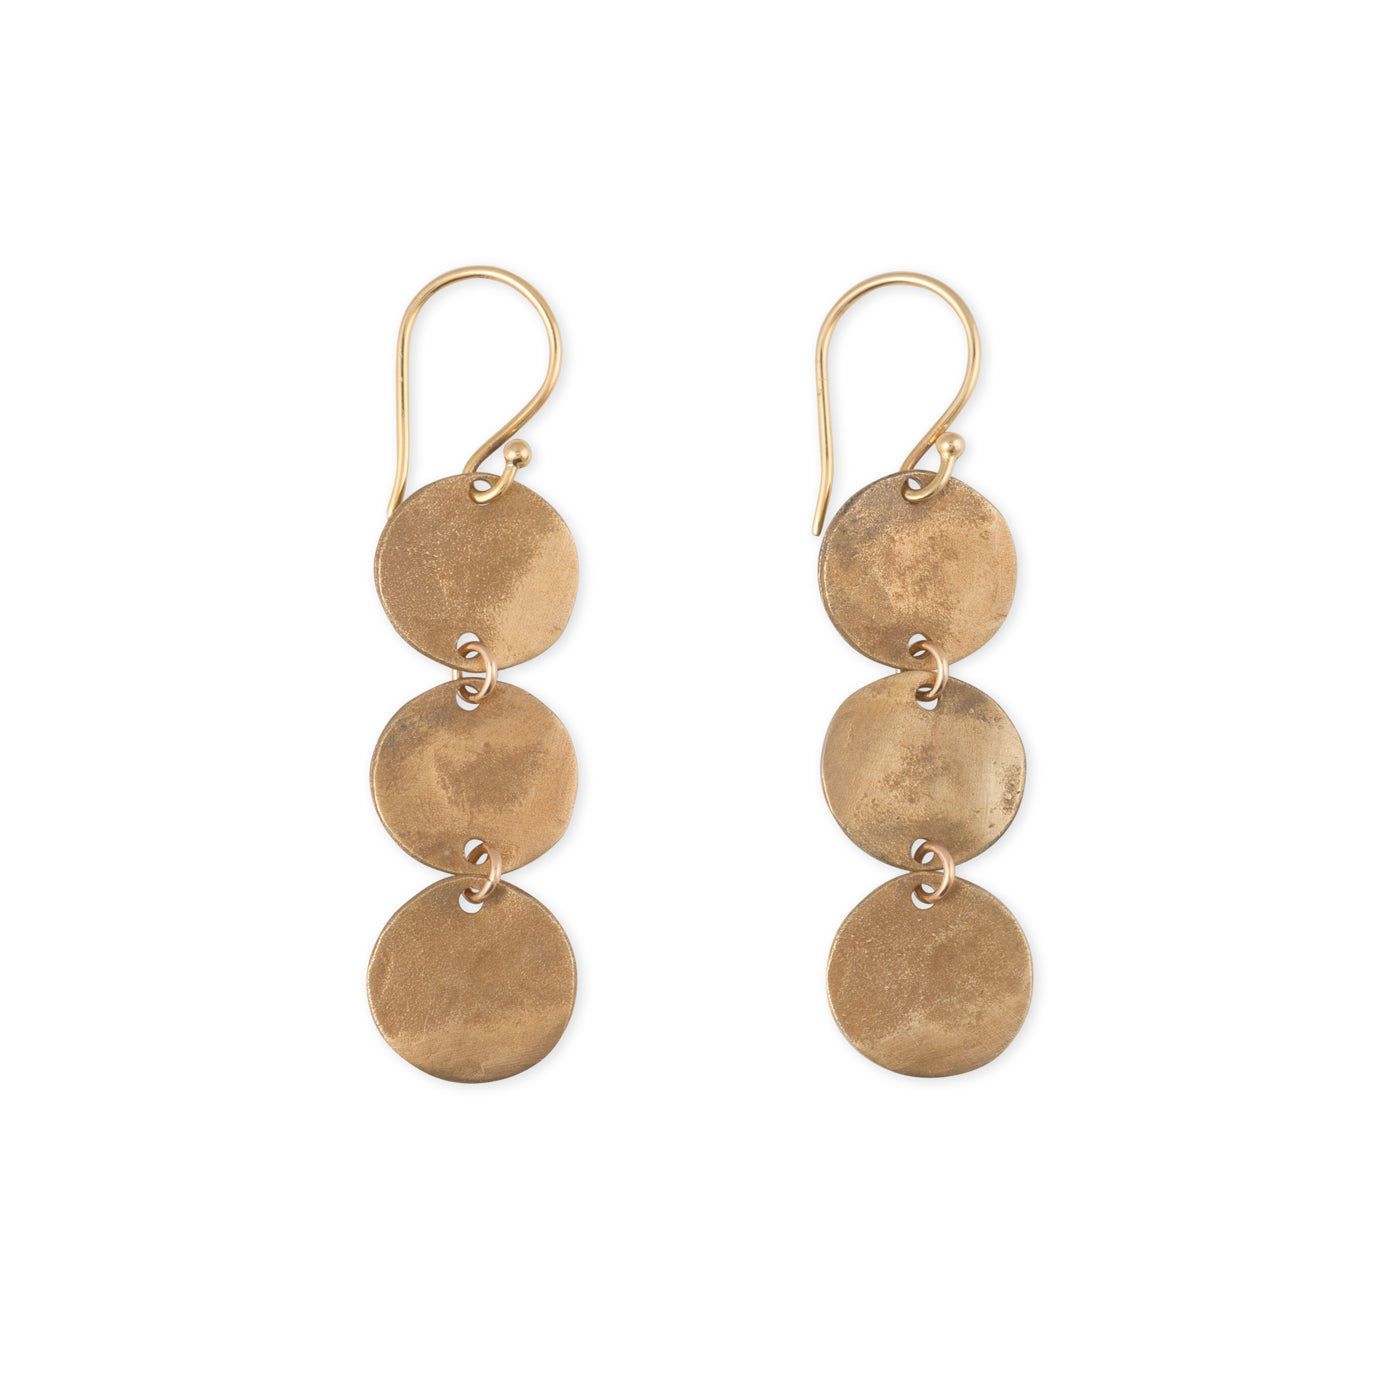 Goddess Earrings handcrafted 3 hammered discs by Kristen Mara